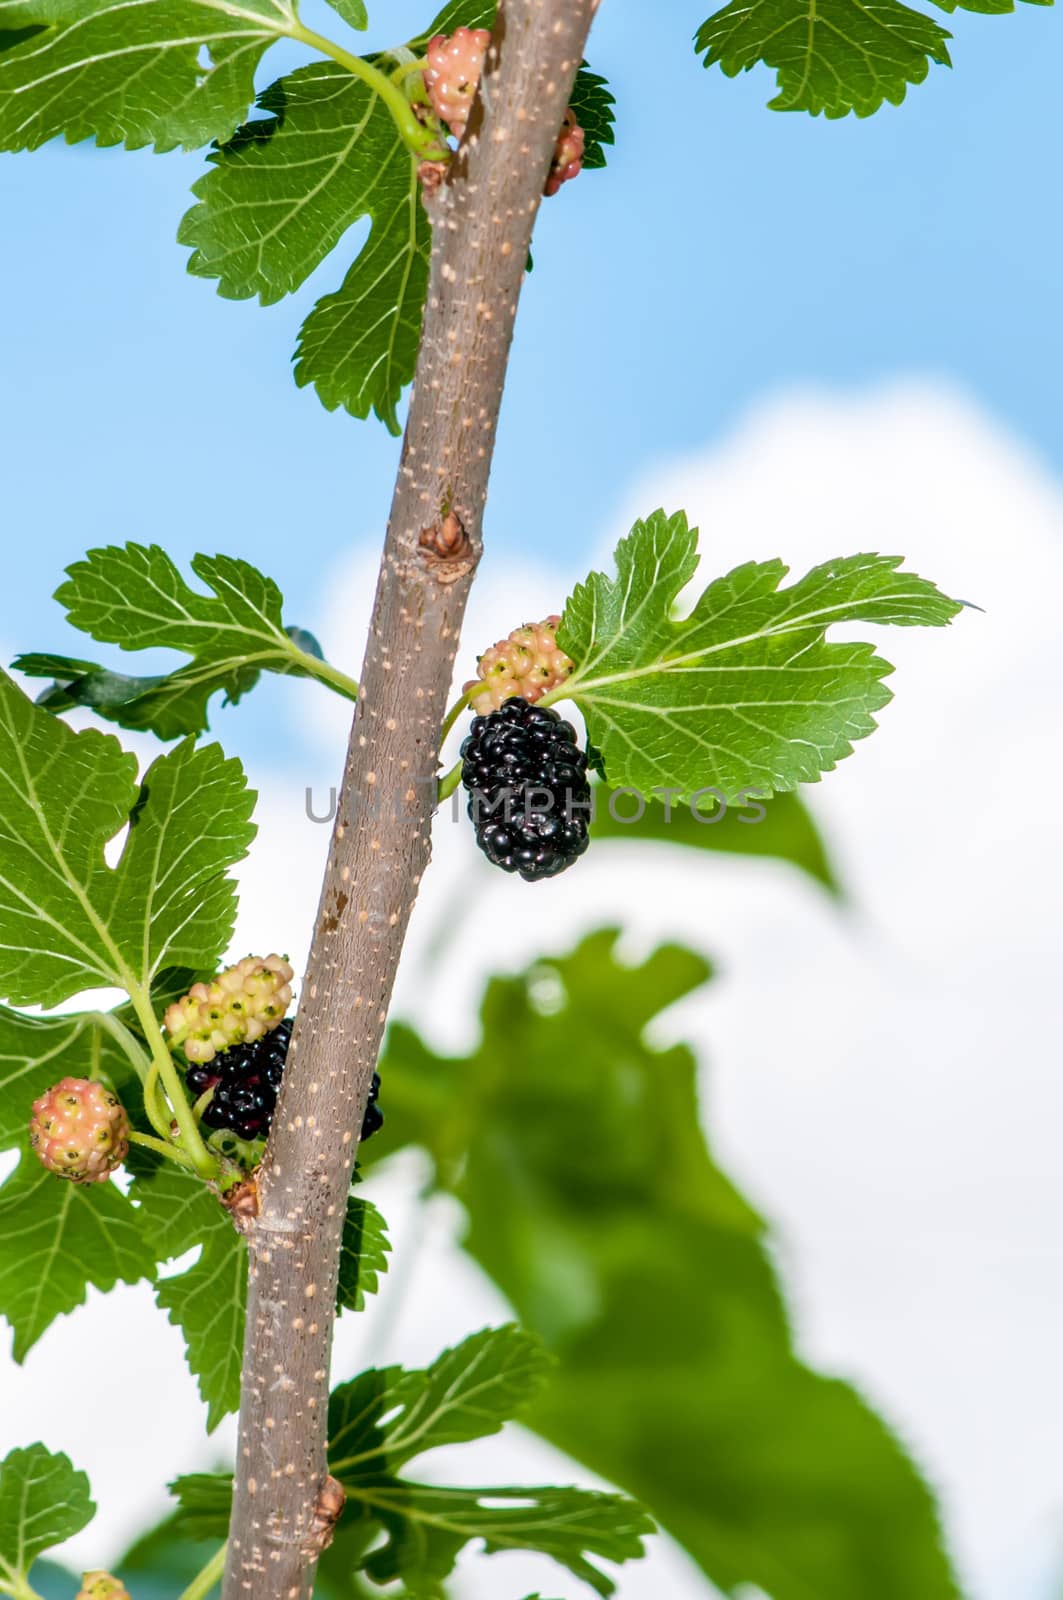 Ripe mulberry on the branches in bright sunlight